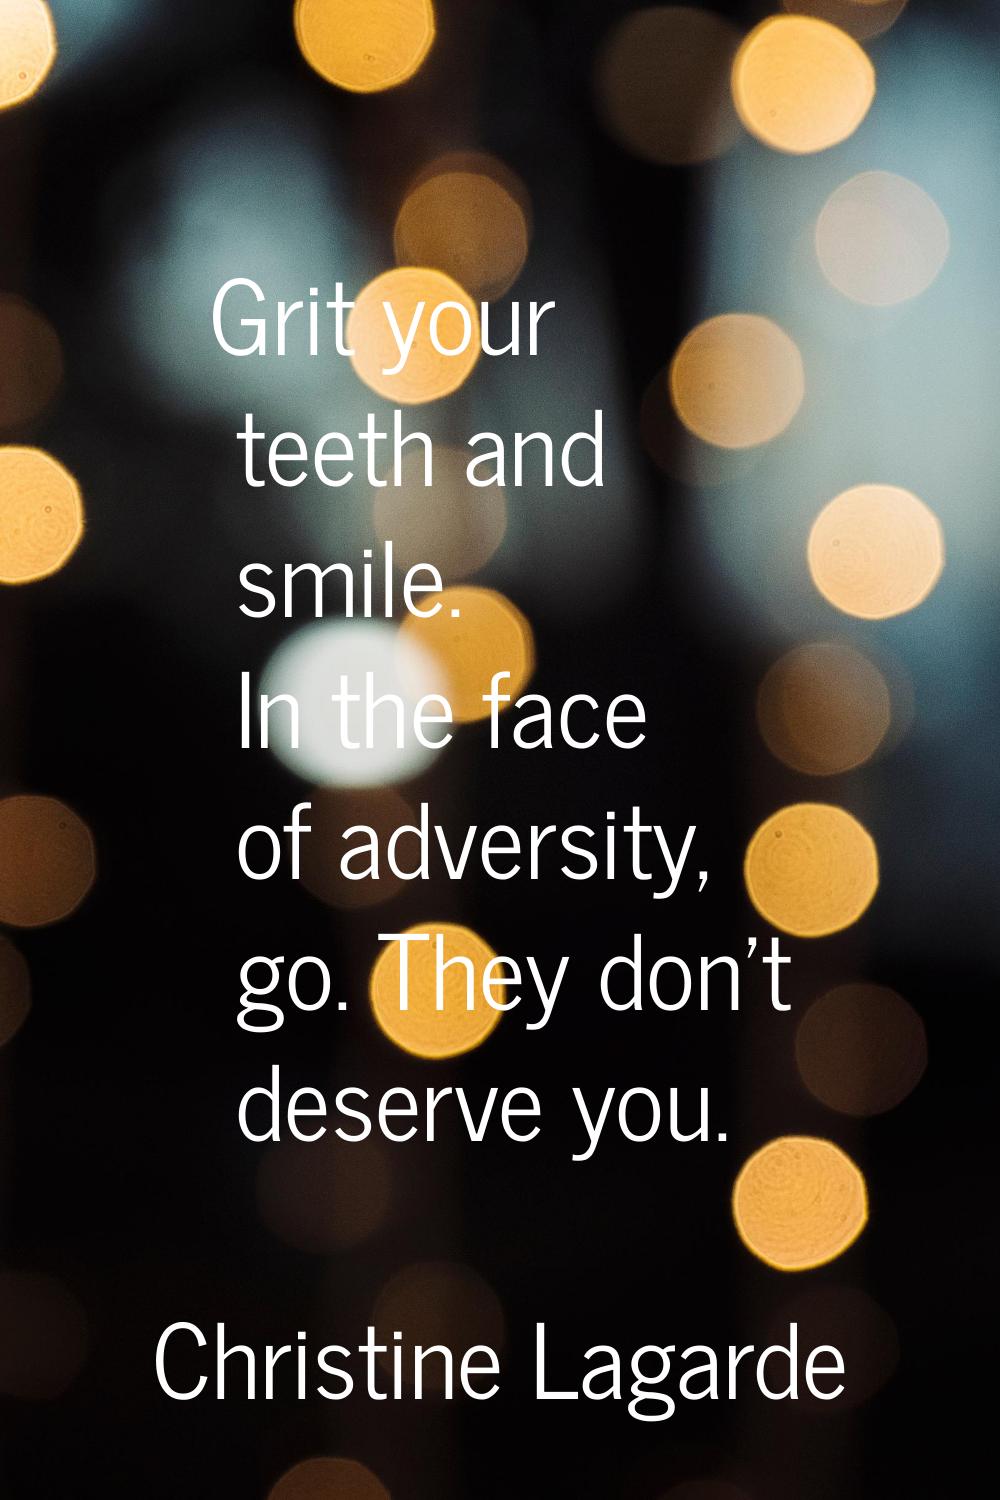 Grit your teeth and smile. In the face of adversity, go. They don't deserve you.